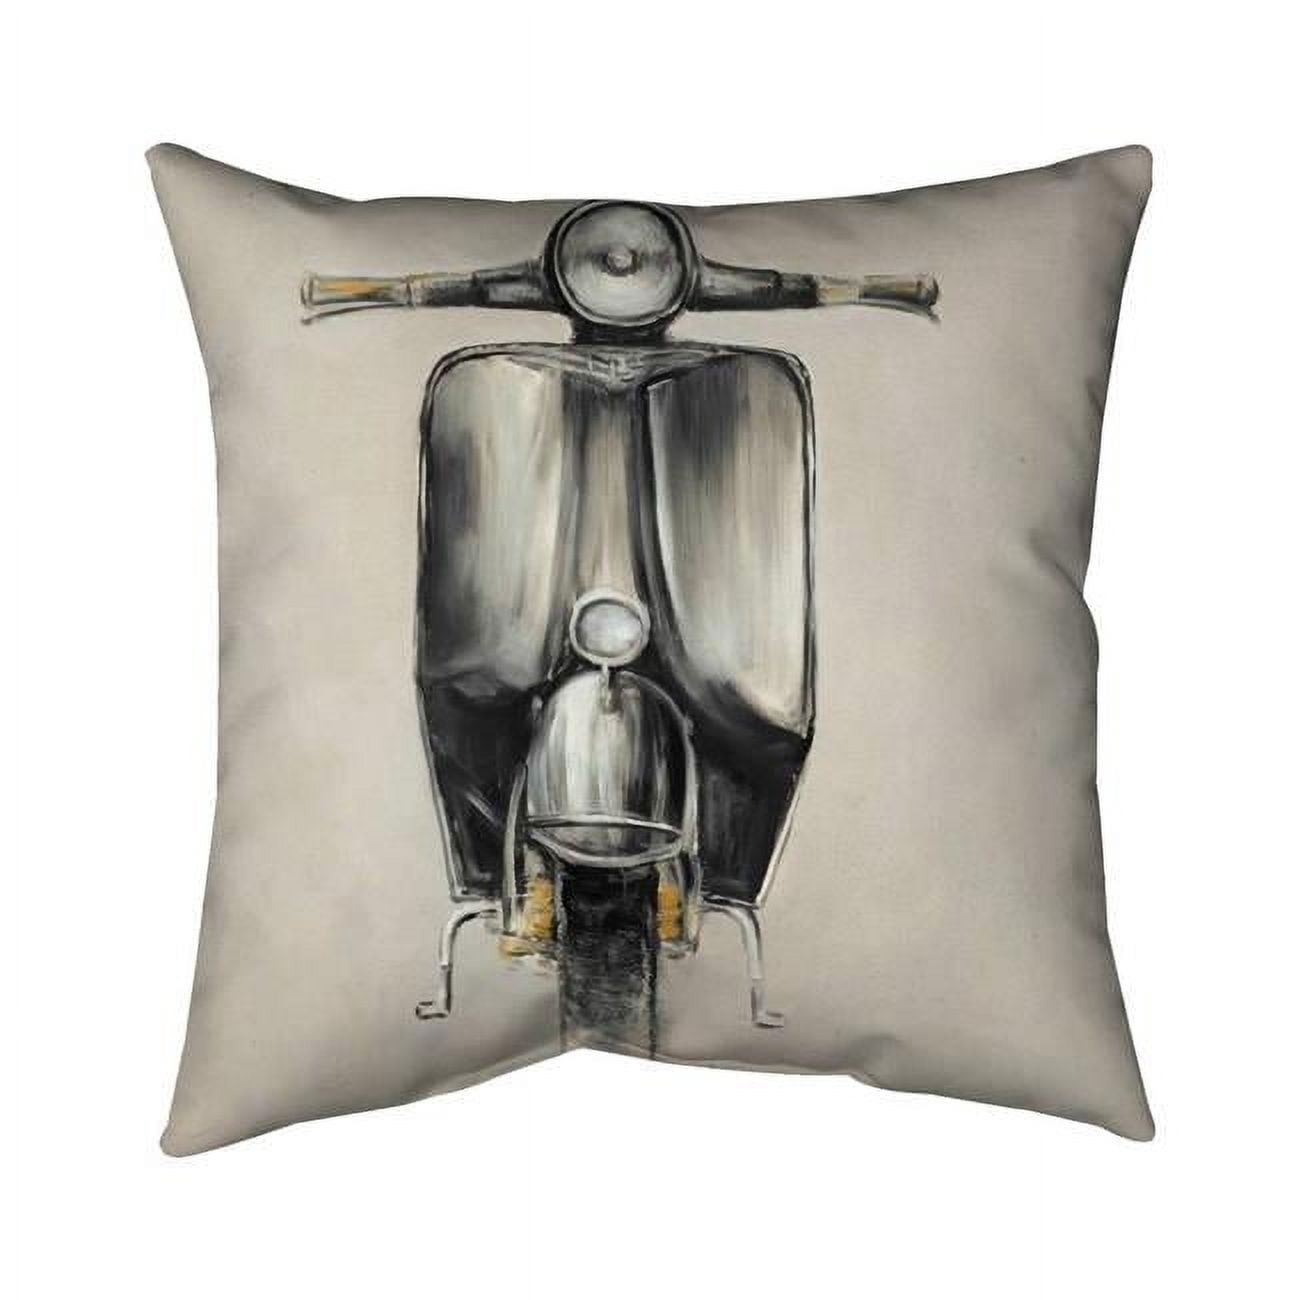 Fondo 16 x 16 in. Small Black Moped-Double Sided Print Outdoor Pillow Cover